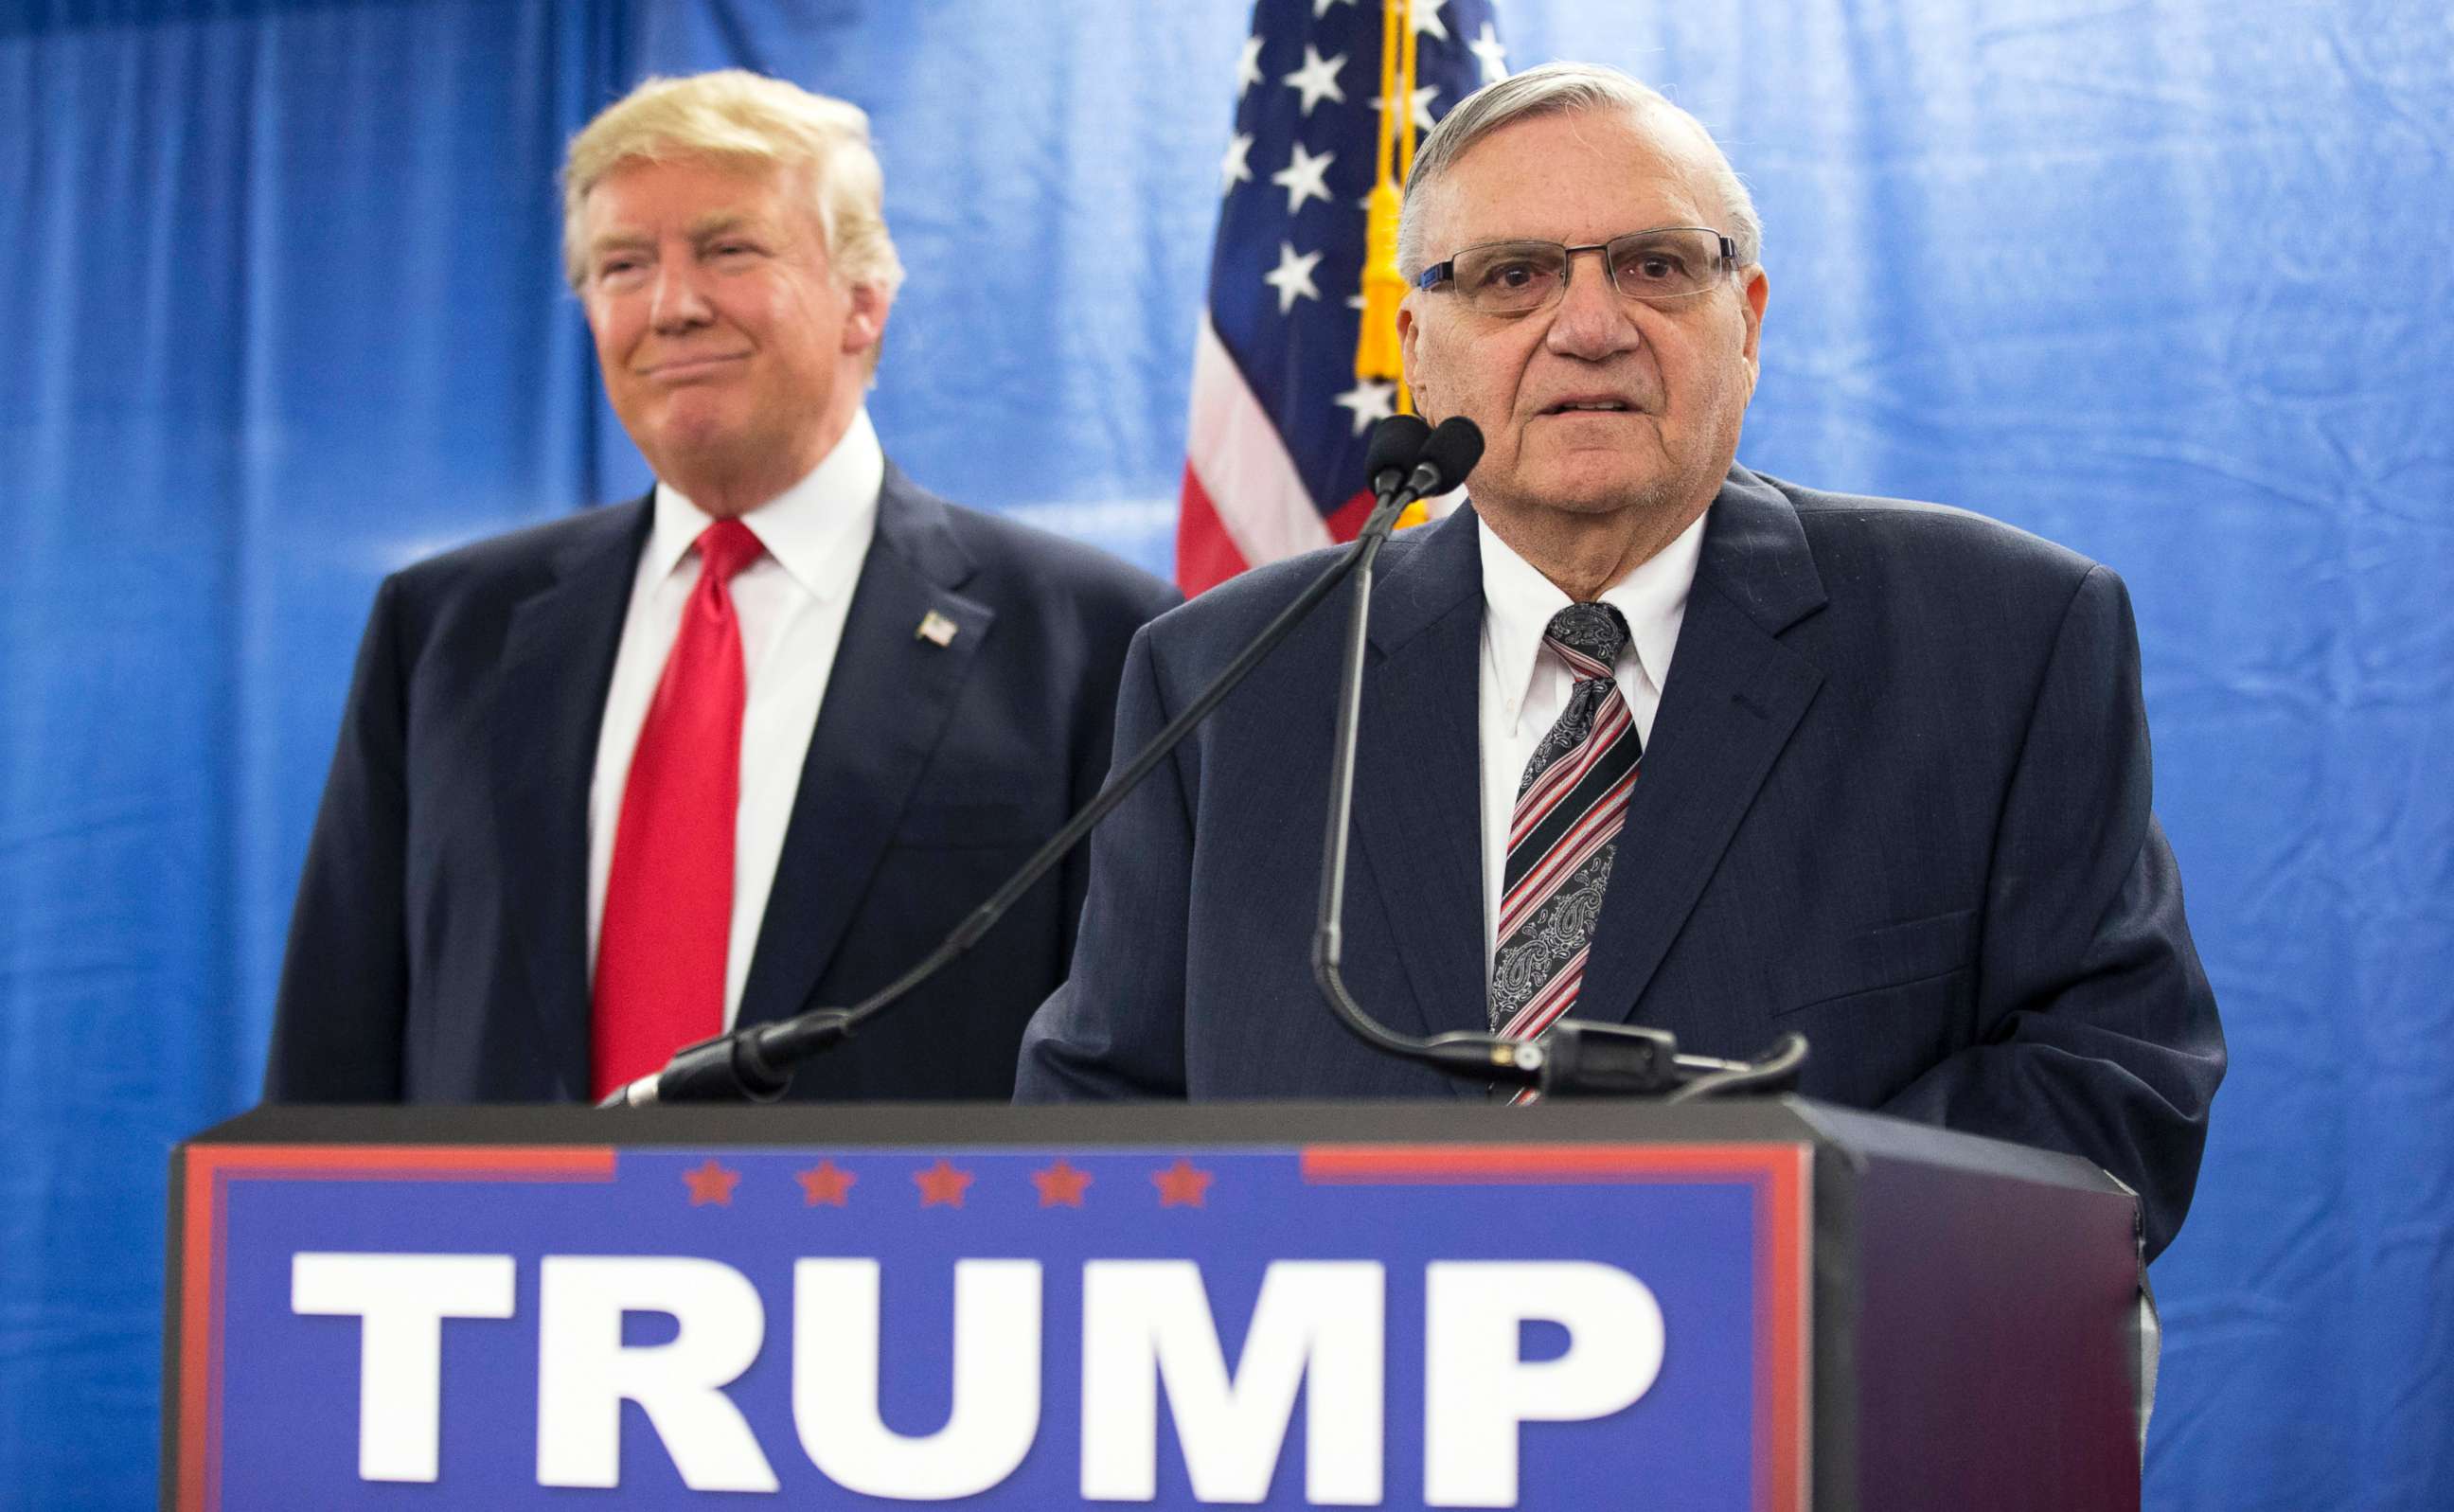 PHOTO: In this Jan. 26, 2016 file photo, Republican presidential candidate Donald Trump, left, is joined by Maricopa County, Ariz., Sheriff Joe Arpaio during a new conference in Marshalltown, Iowa.